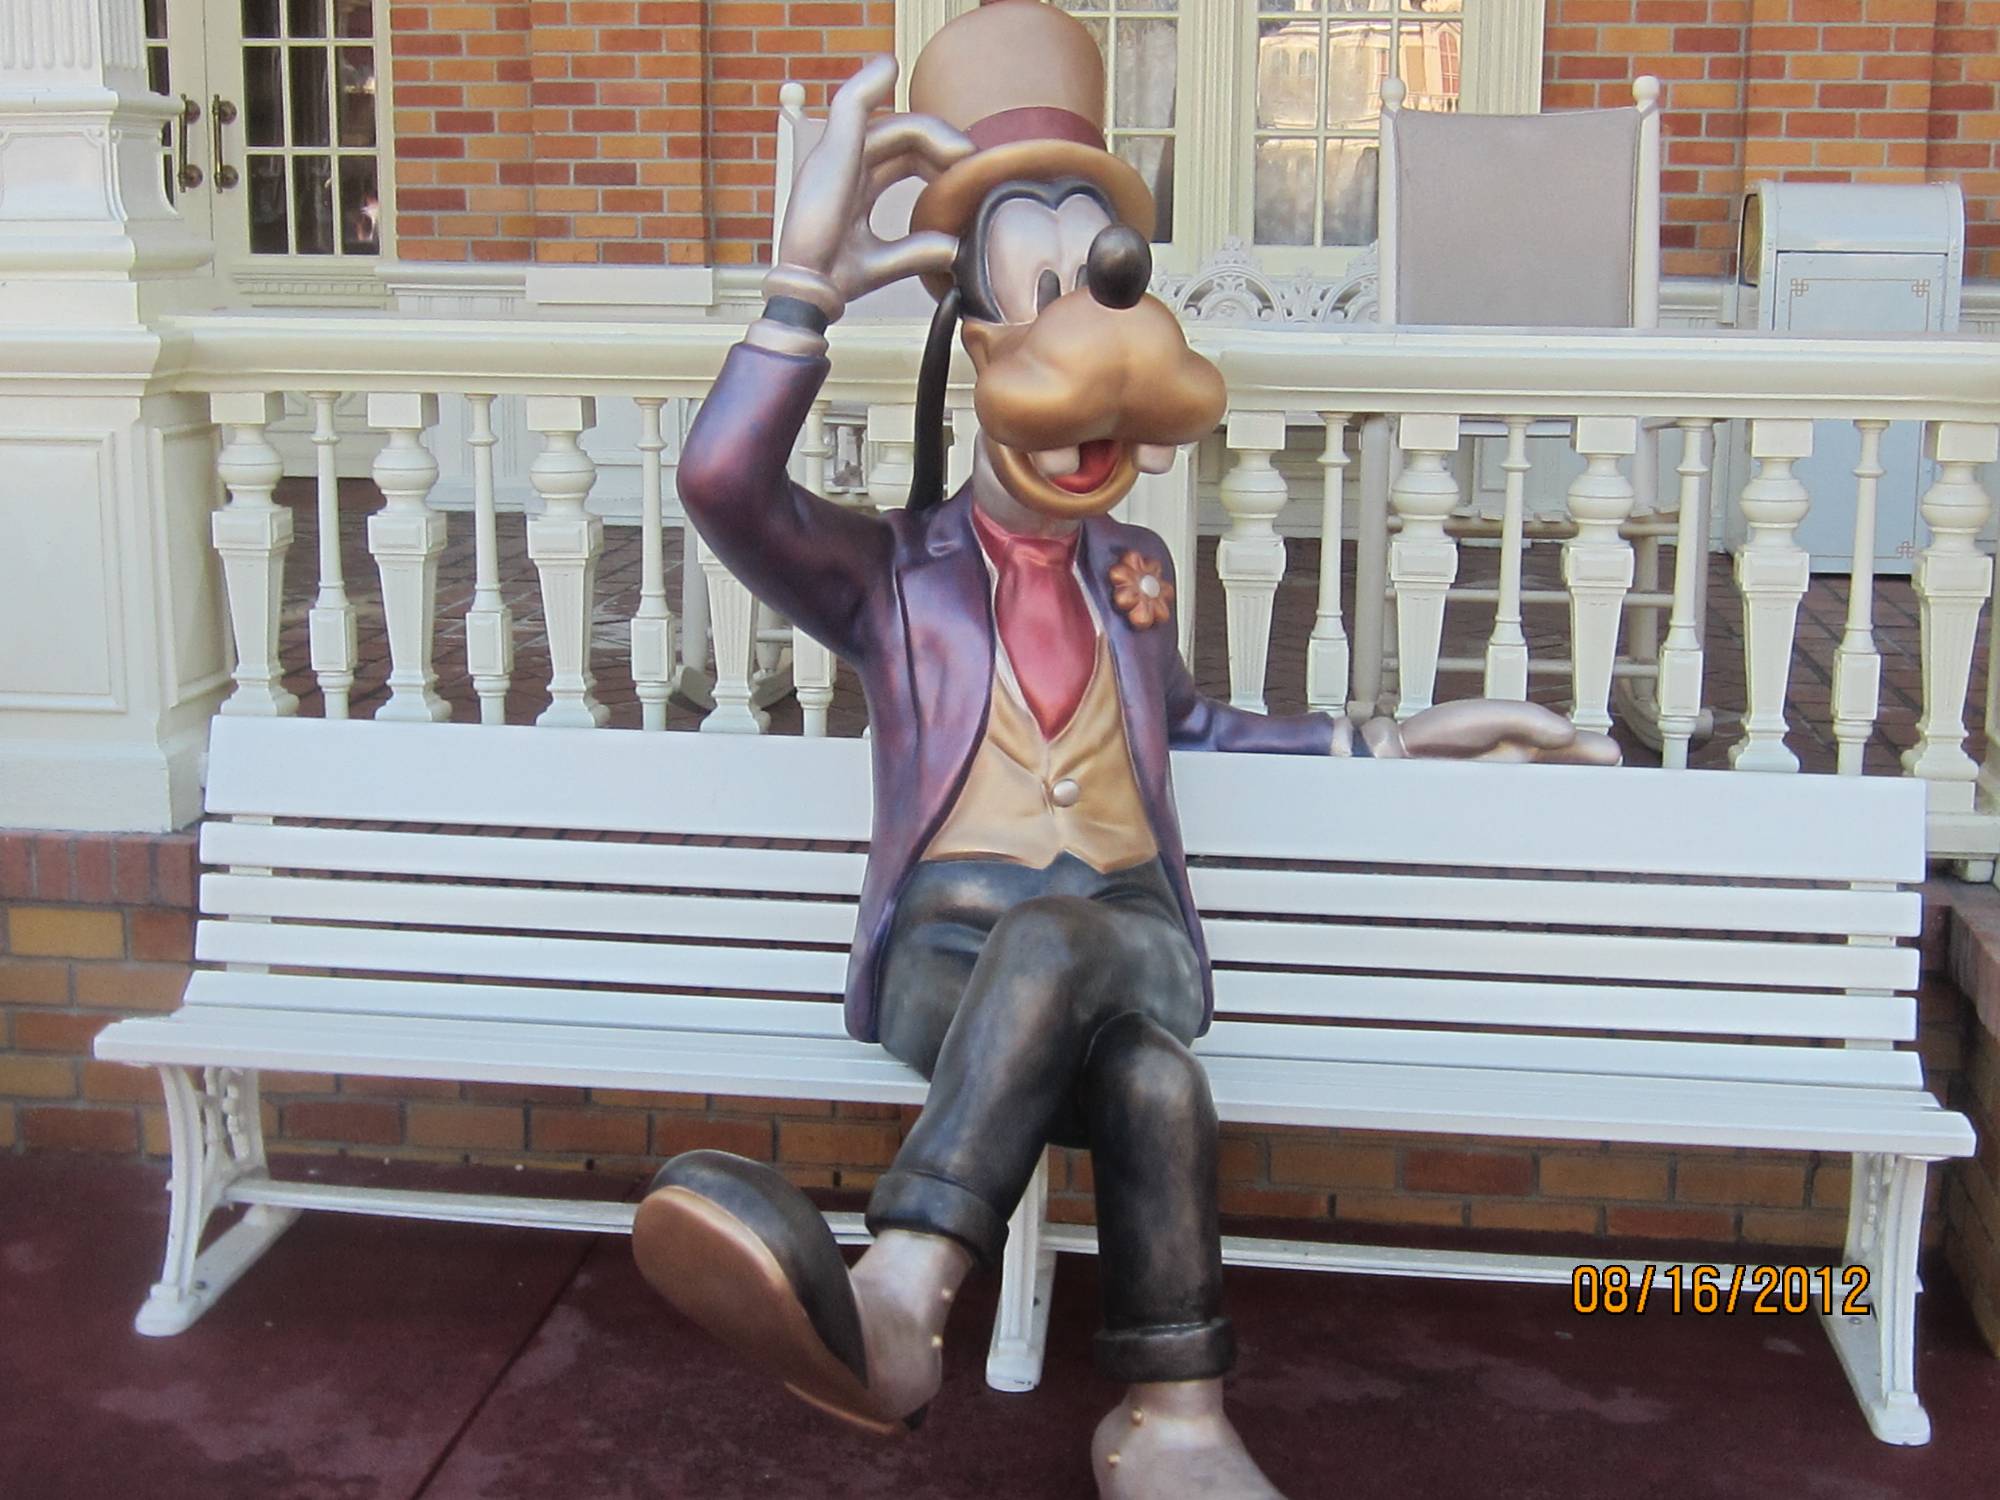 Nice to see Goofy back!